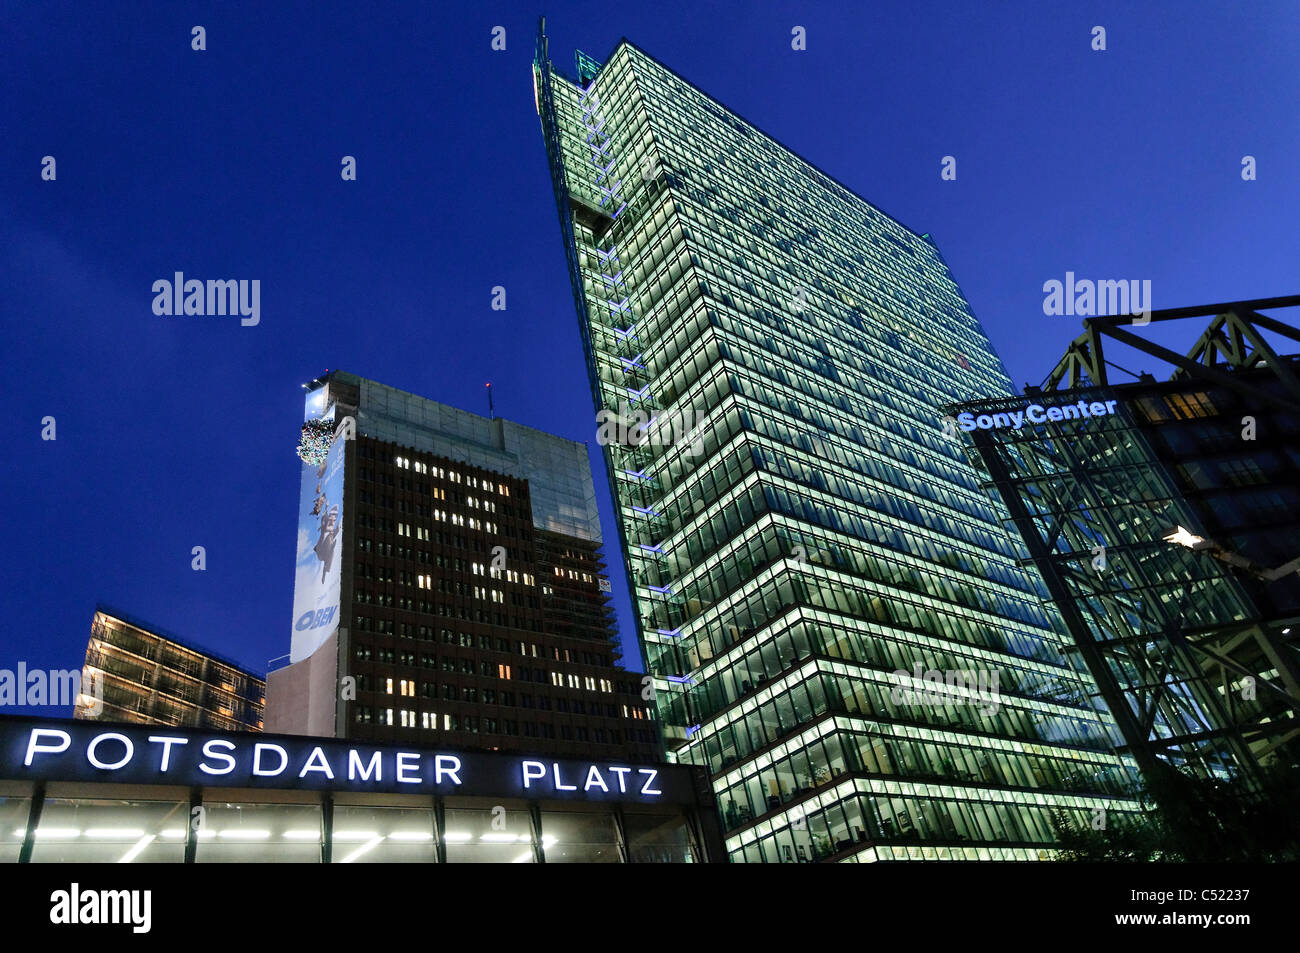 High-rise buildings on Potsdamer Platz square at night, Berlin, Germany, Europe Stock Photo